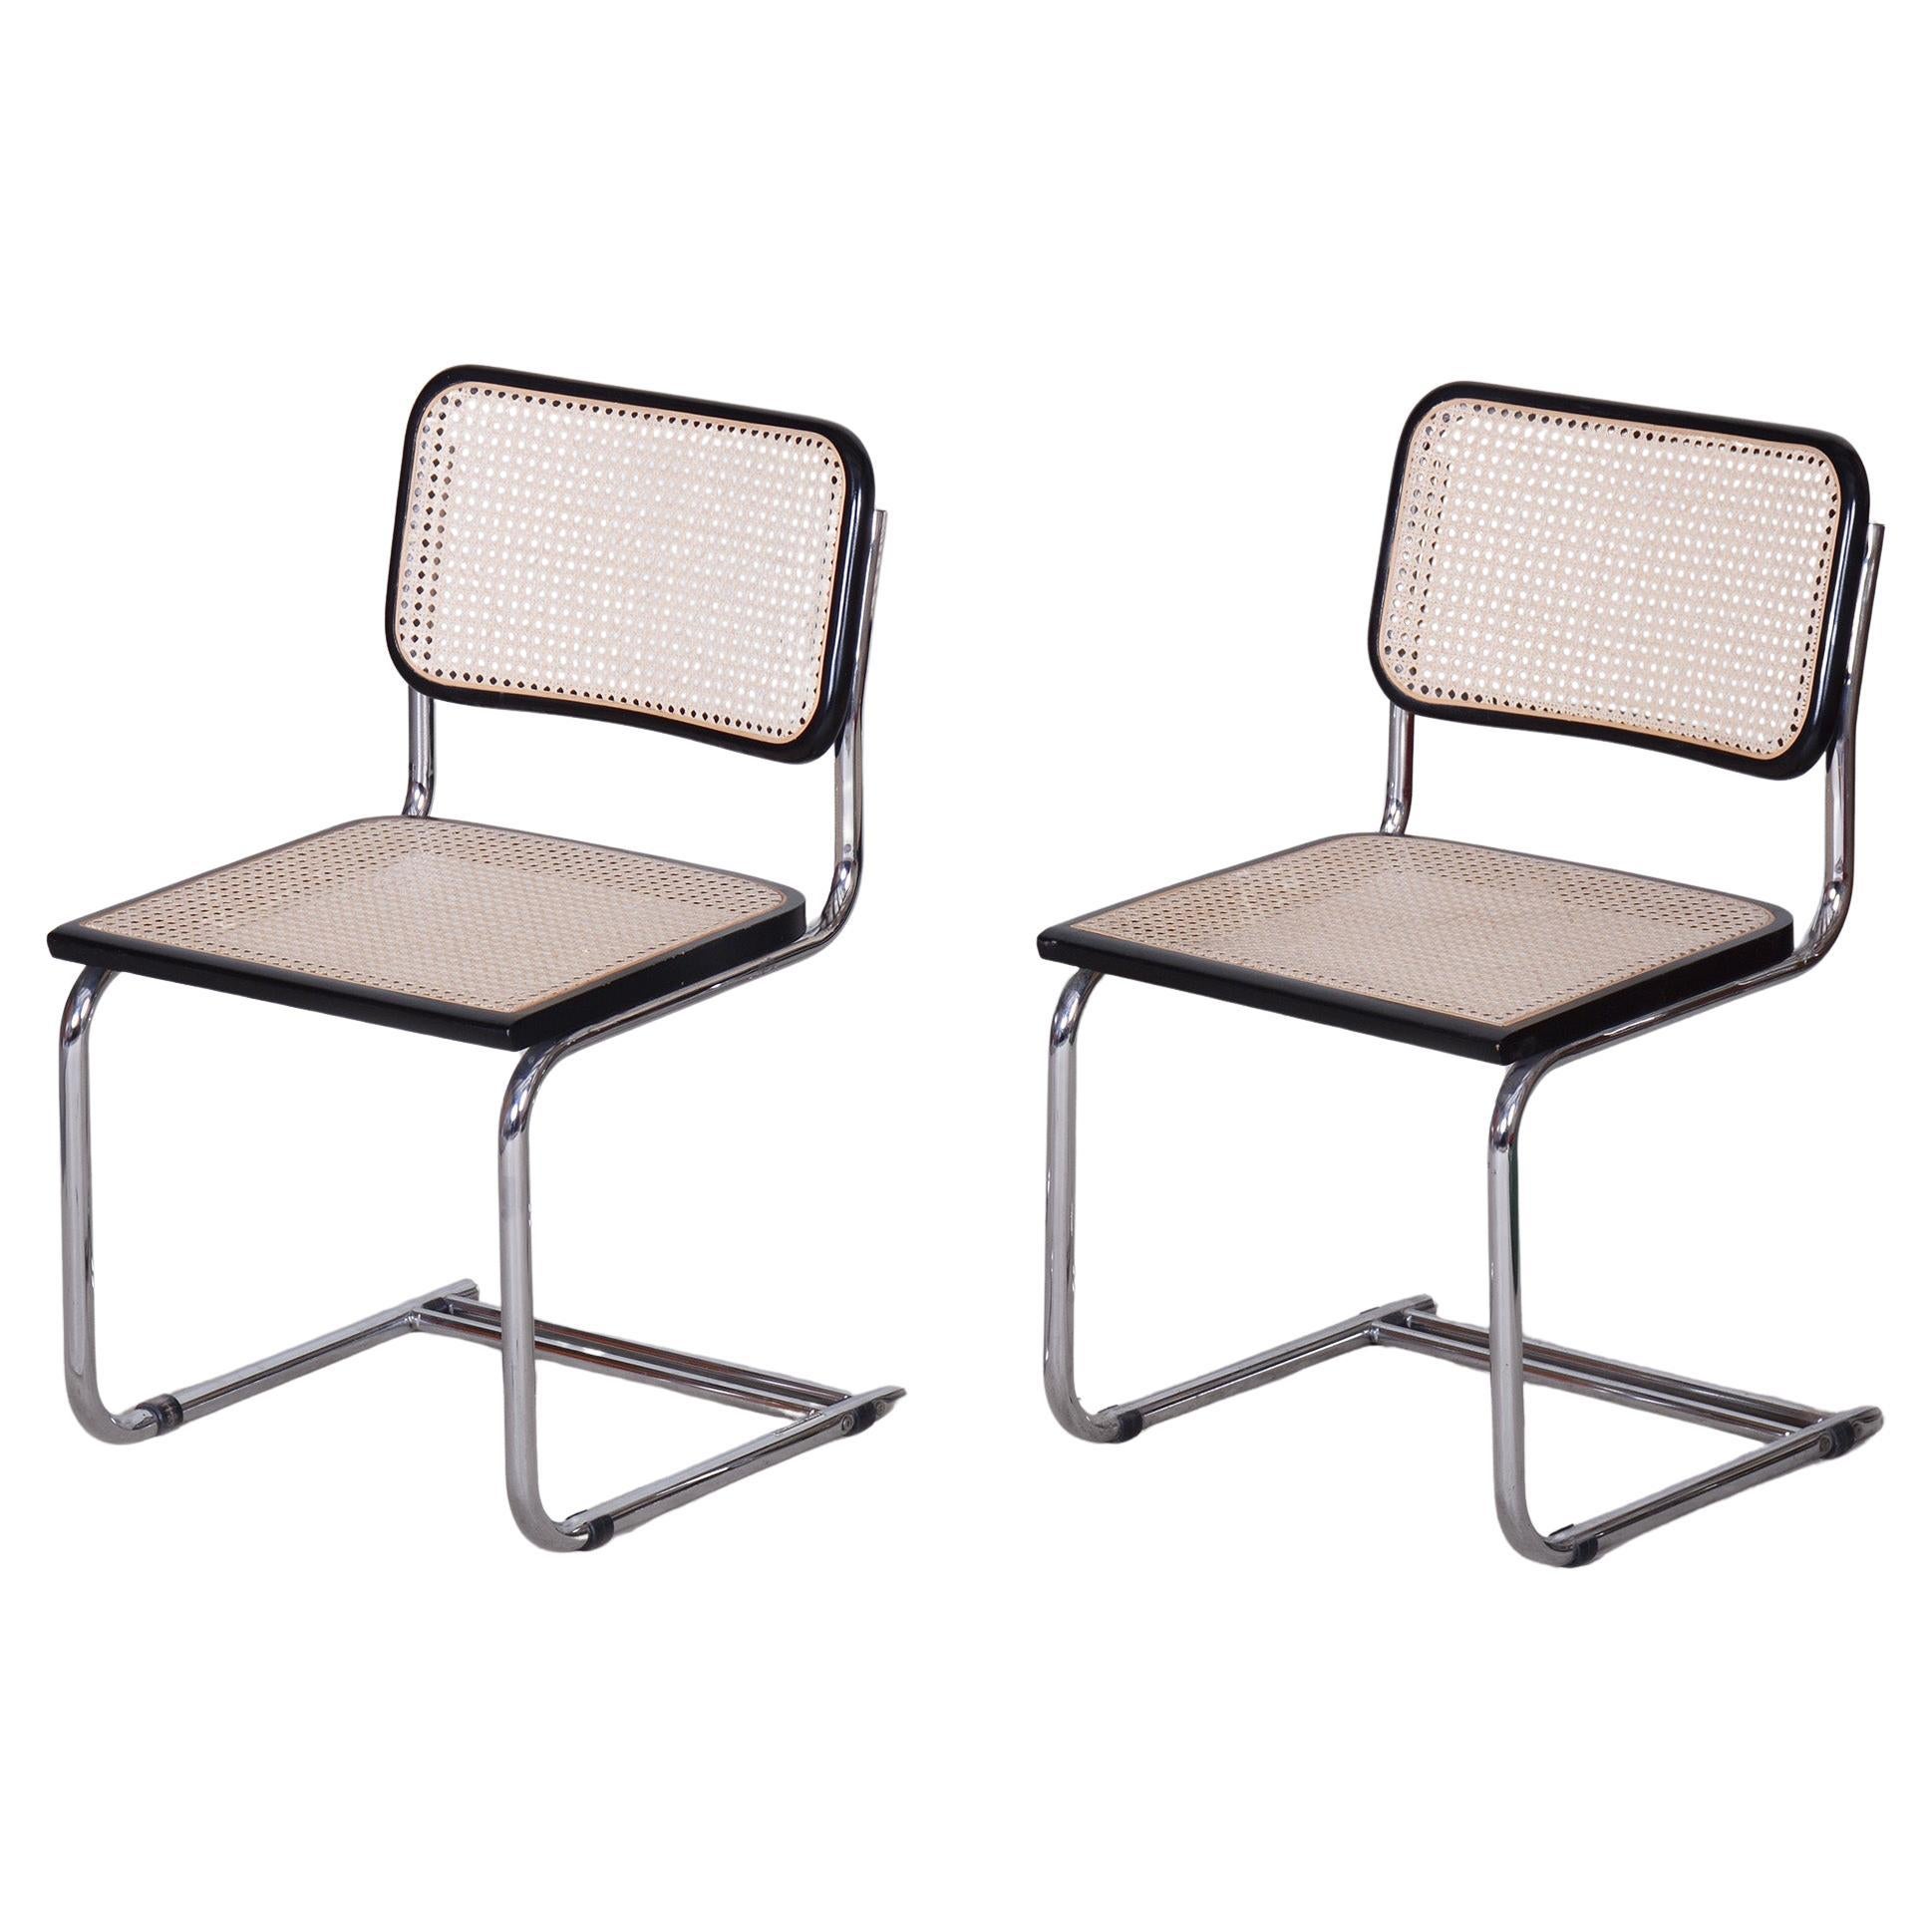 Original Pair of Bauhaus Chairs, Chrome-Plated Steel, Rattan Beech, 1960s, Italy For Sale